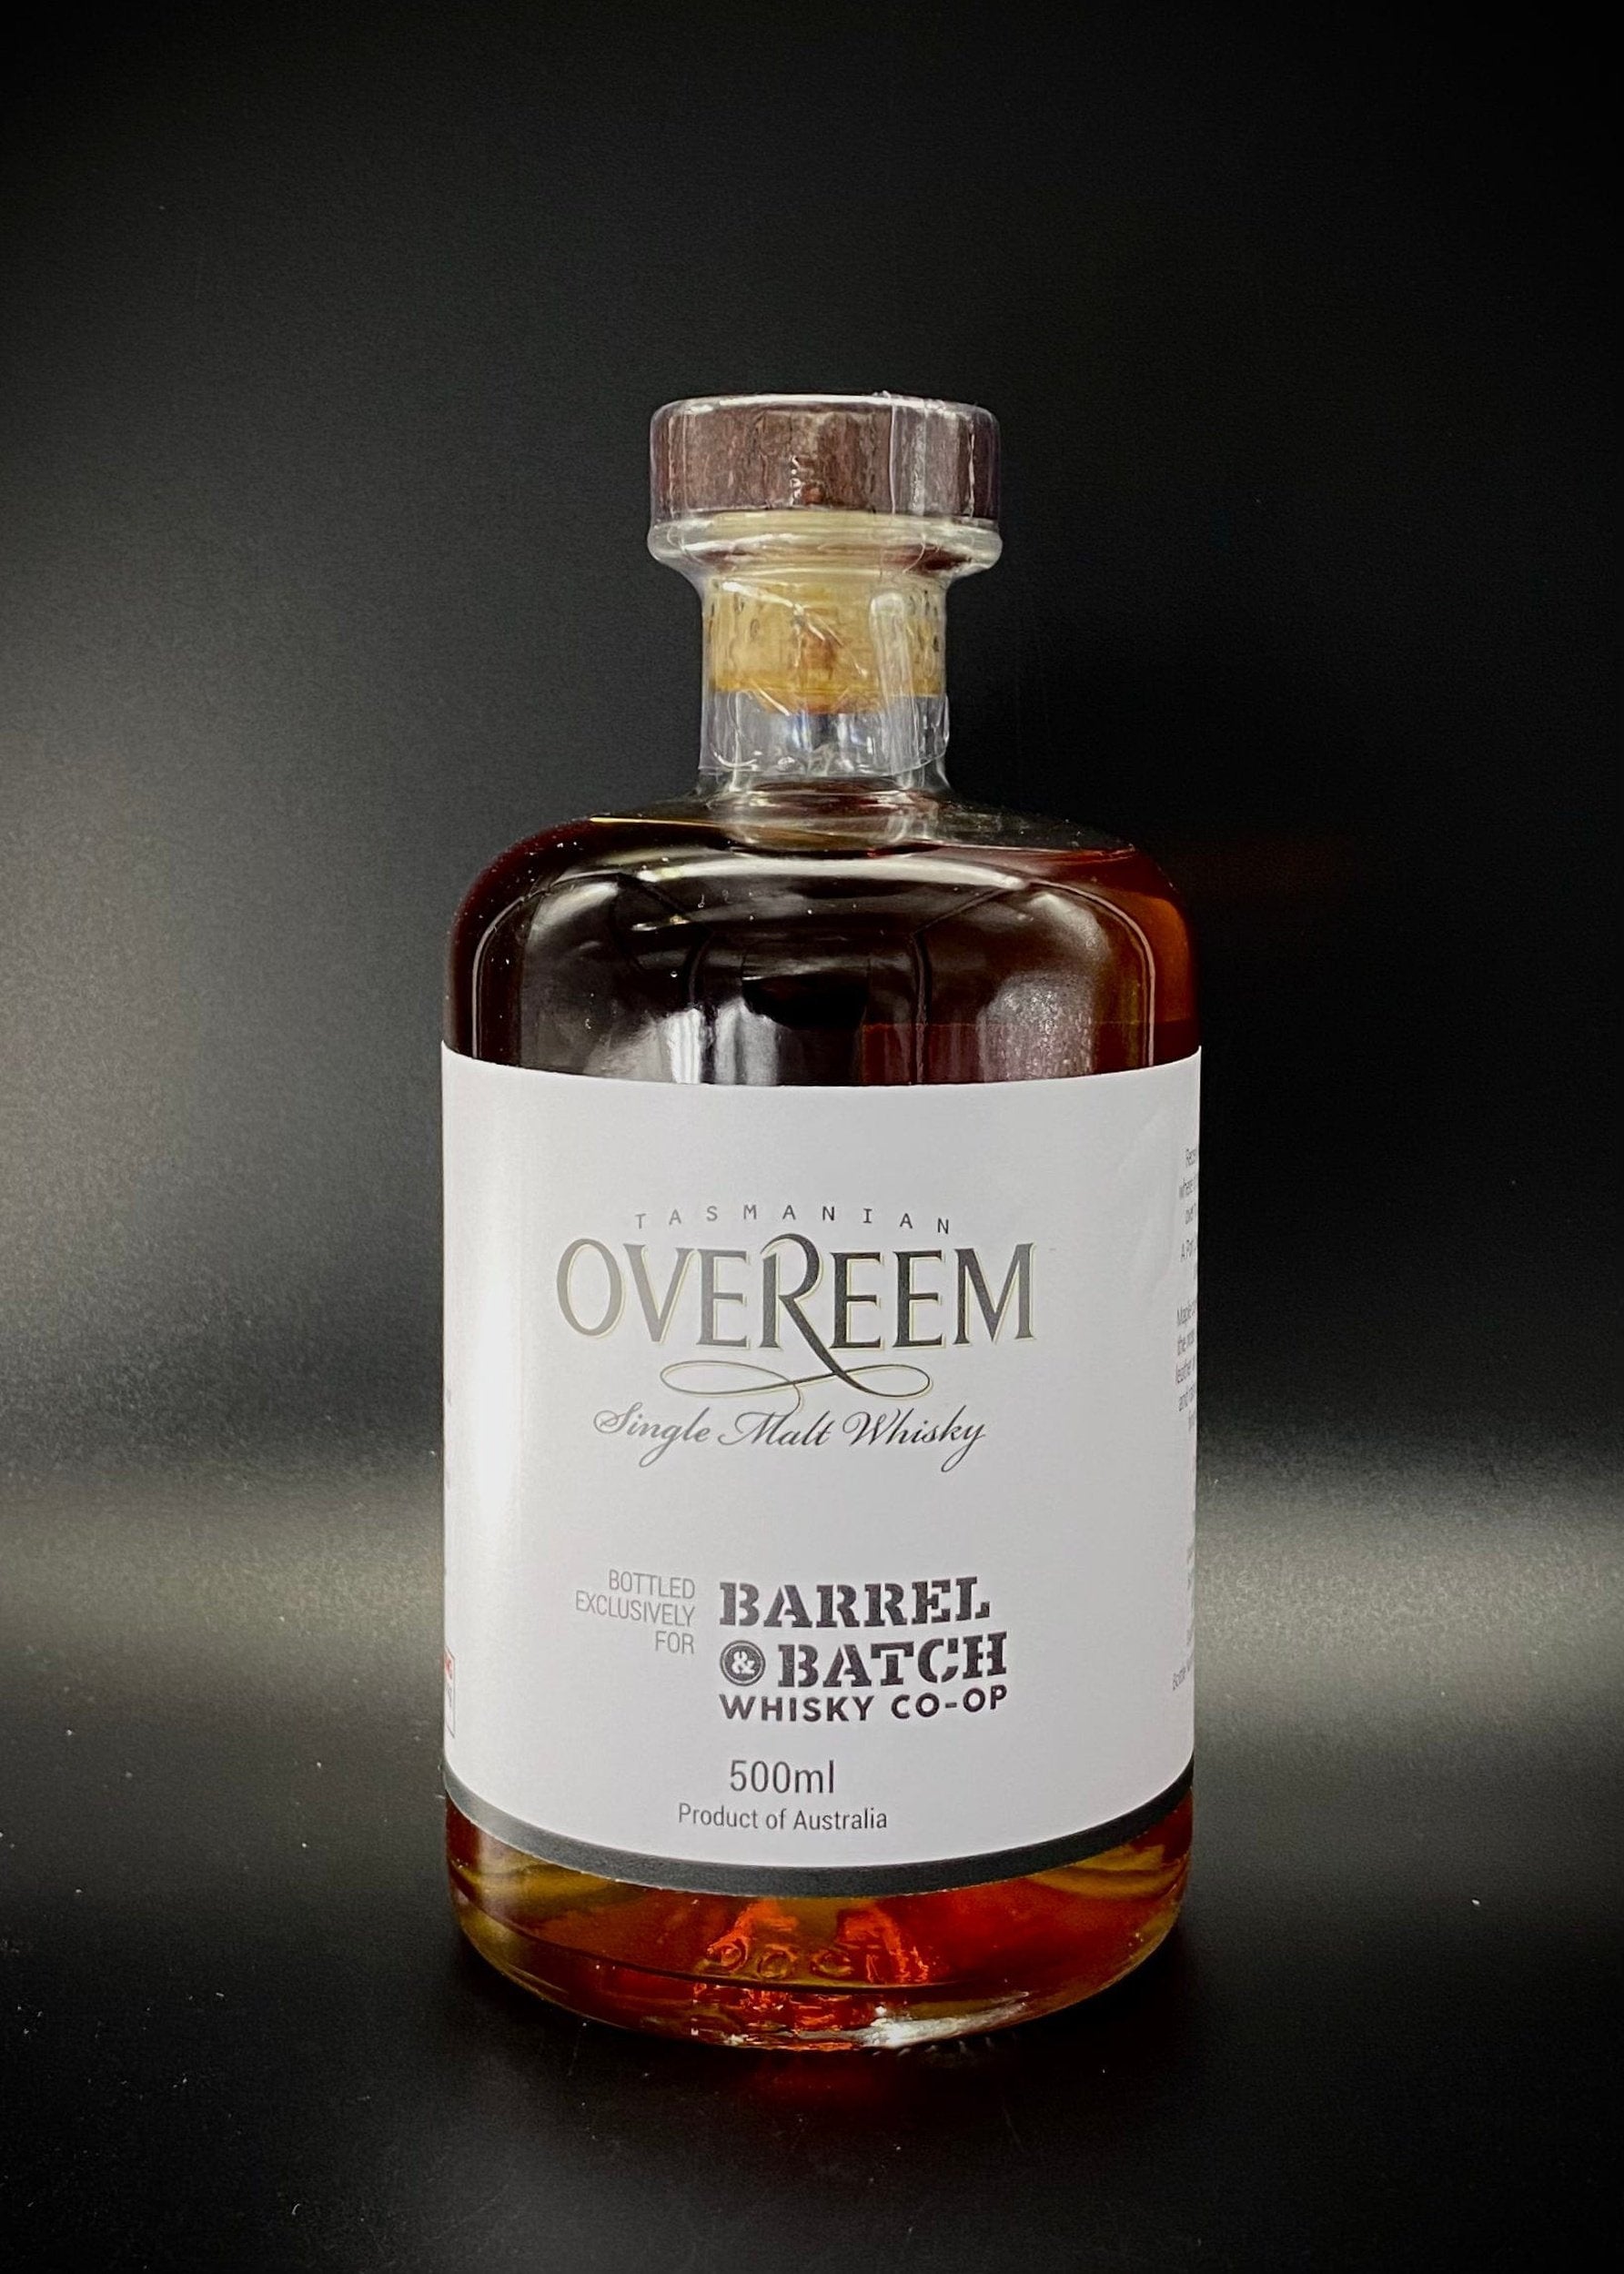 Horny Pony  Overeem 6y/o Port Cask#OD330 Barrel and Batch Exclusive - 60%ABV - 30ml